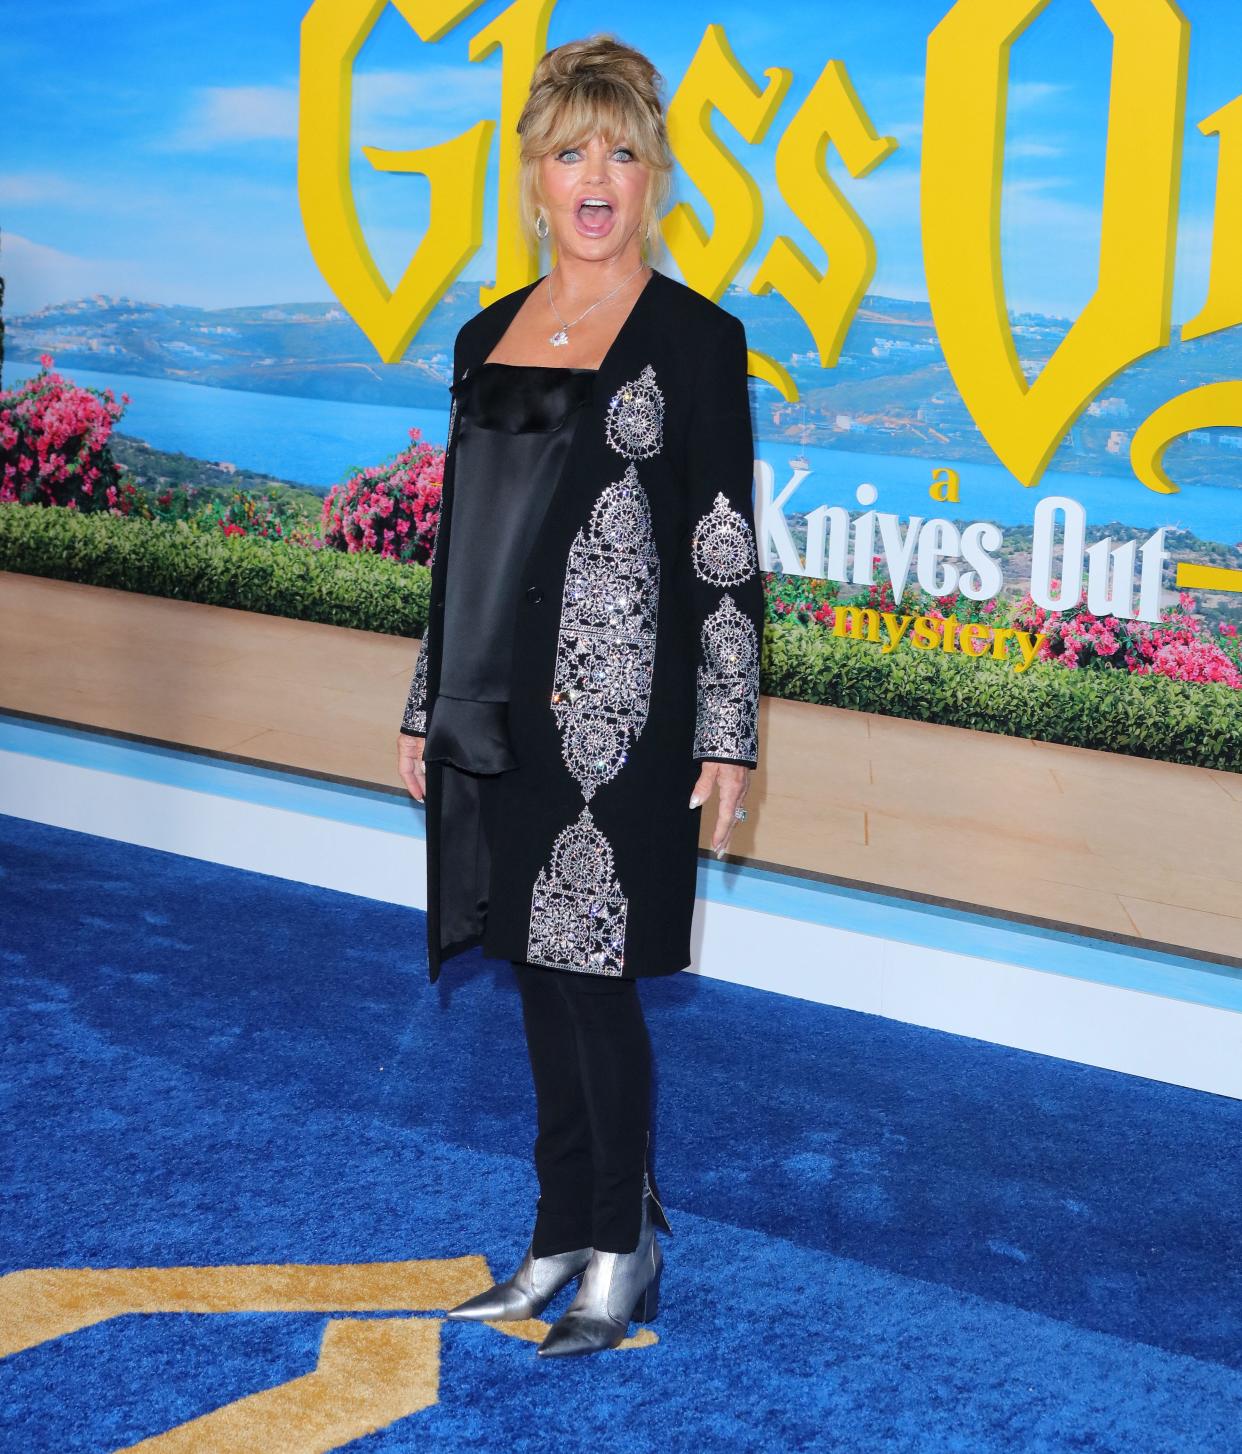 Actress Goldie Hawn arrives for Netflix's "Glass Onion: A Knives Out Mystery" premiere in November 2022 at the Academy Museum of Motion Pictures in Los Angeles.